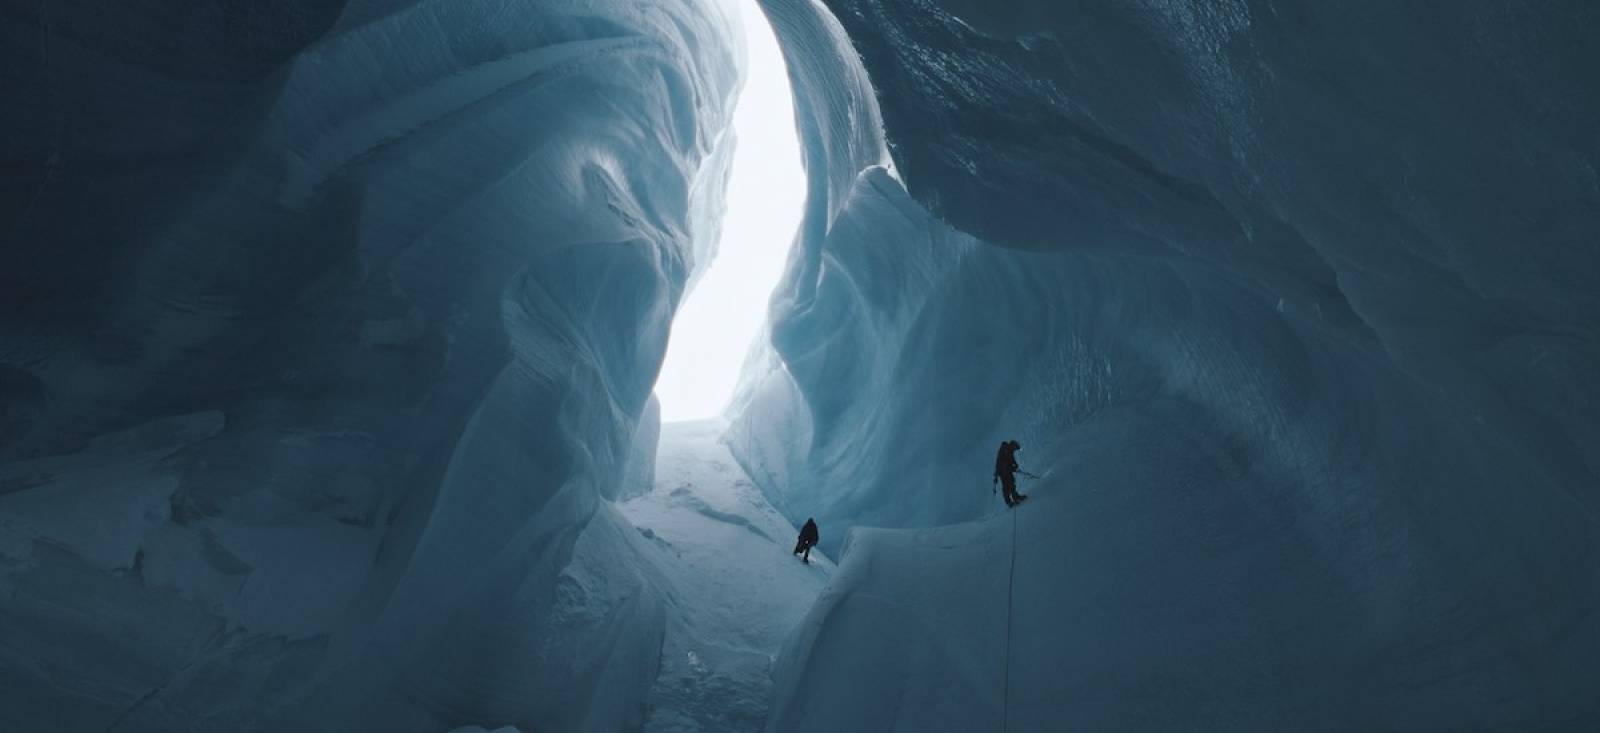 INTO THE ICE